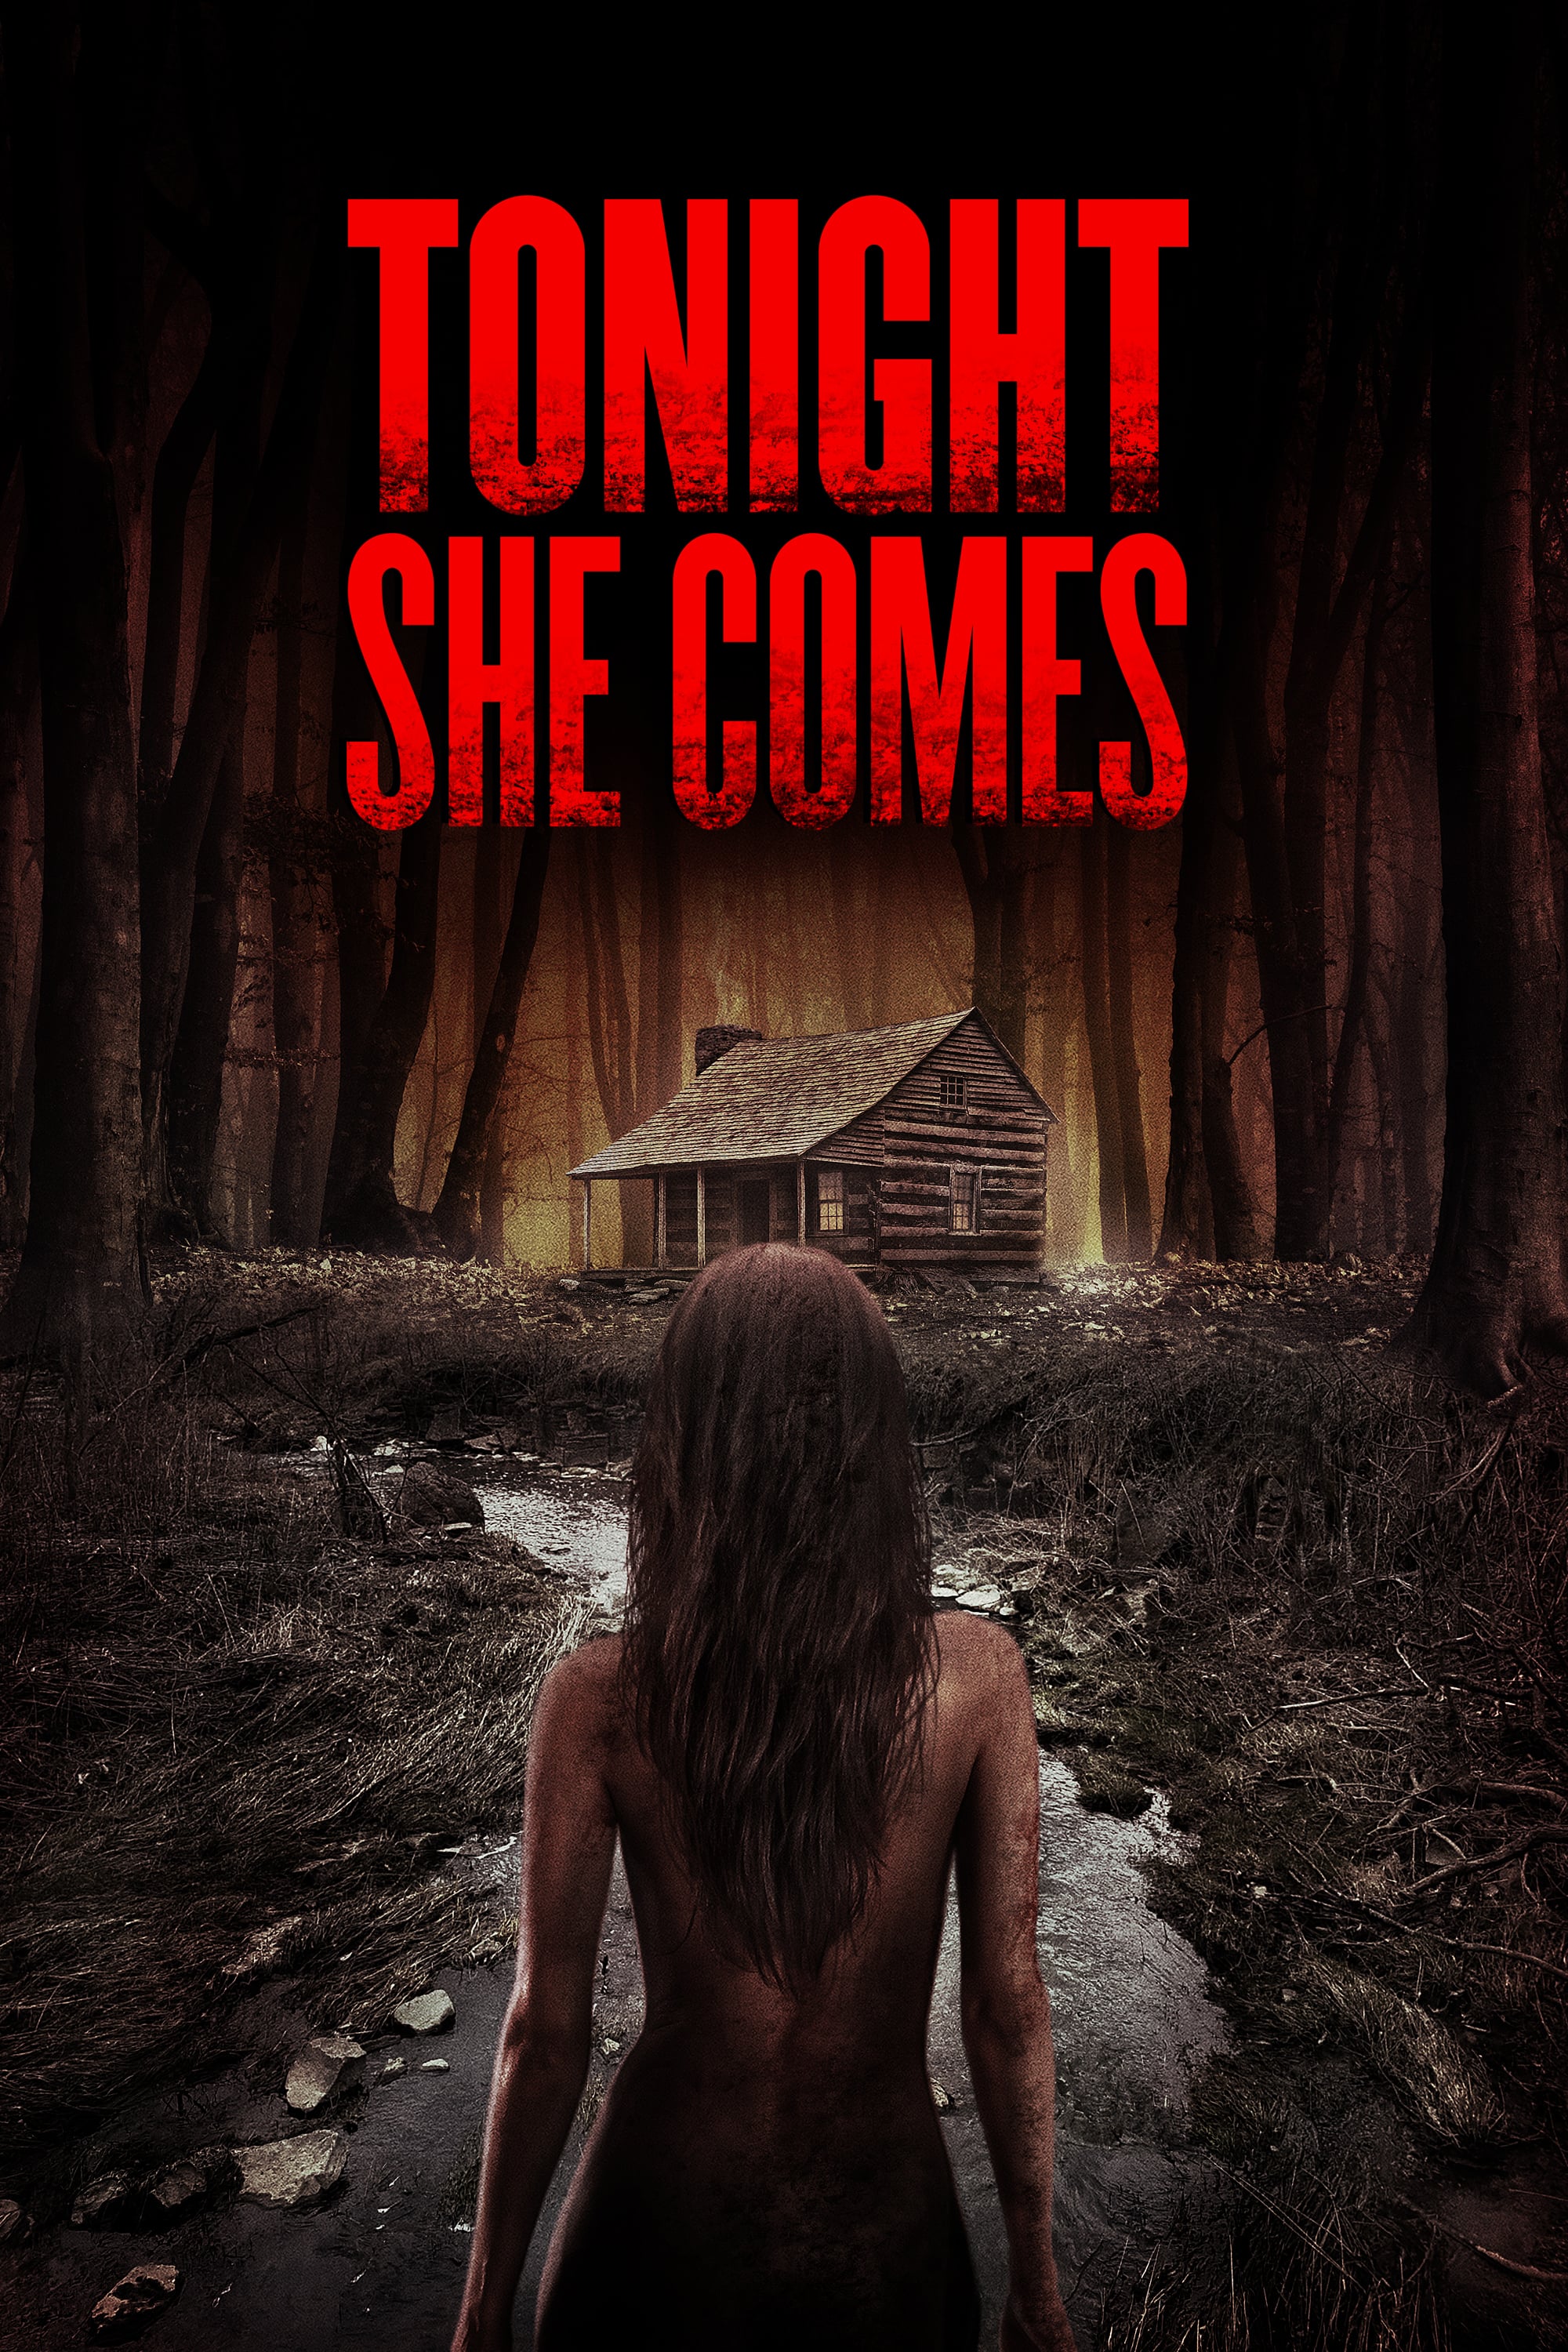 She comes the game. Она придёт сегодня ночью - Tonight she comes (2016).